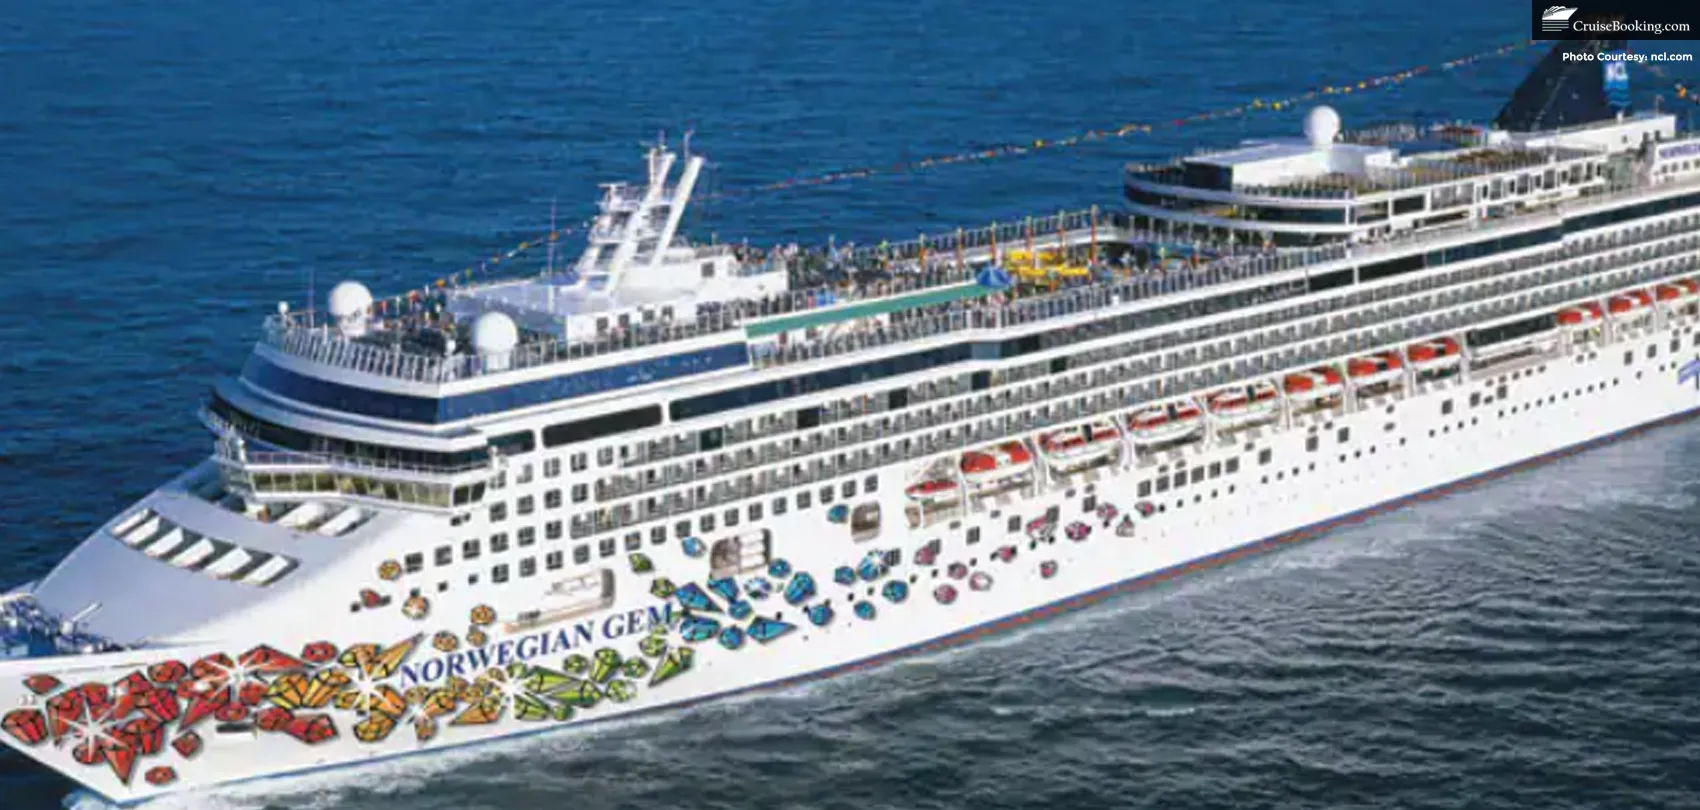 Norwegian Cruise Line To Introduce 1,000 Solo Staterooms